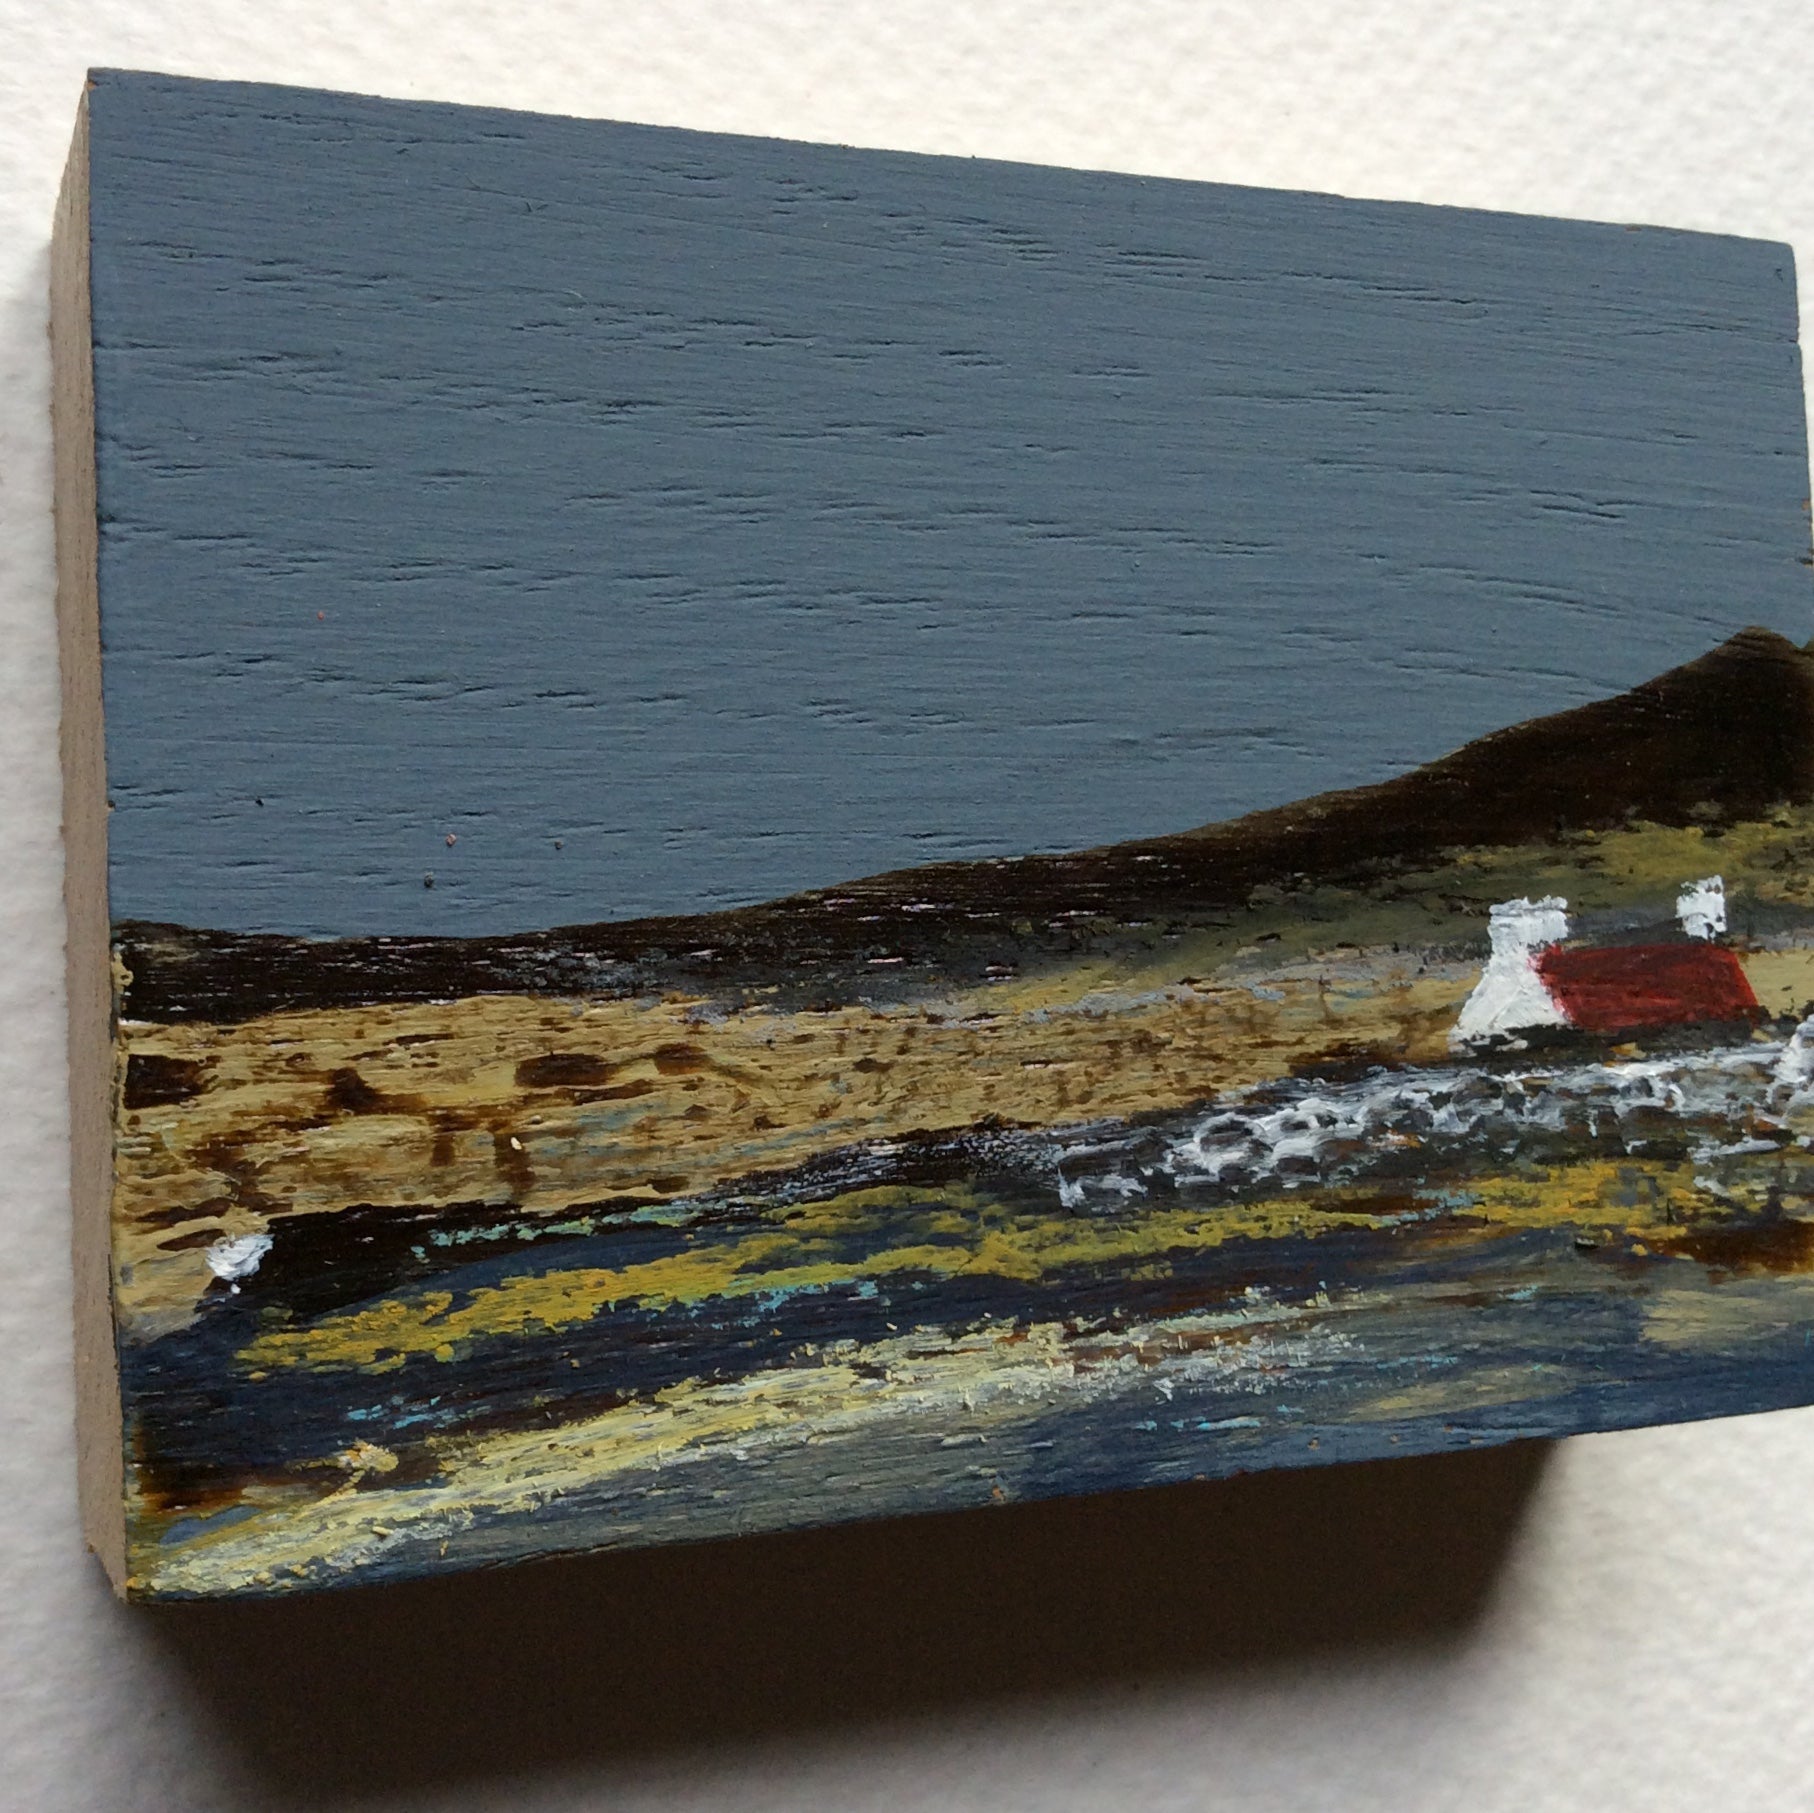 Miniature Mixed Media Art on wood By Louise O'Hara - "April Breeze”